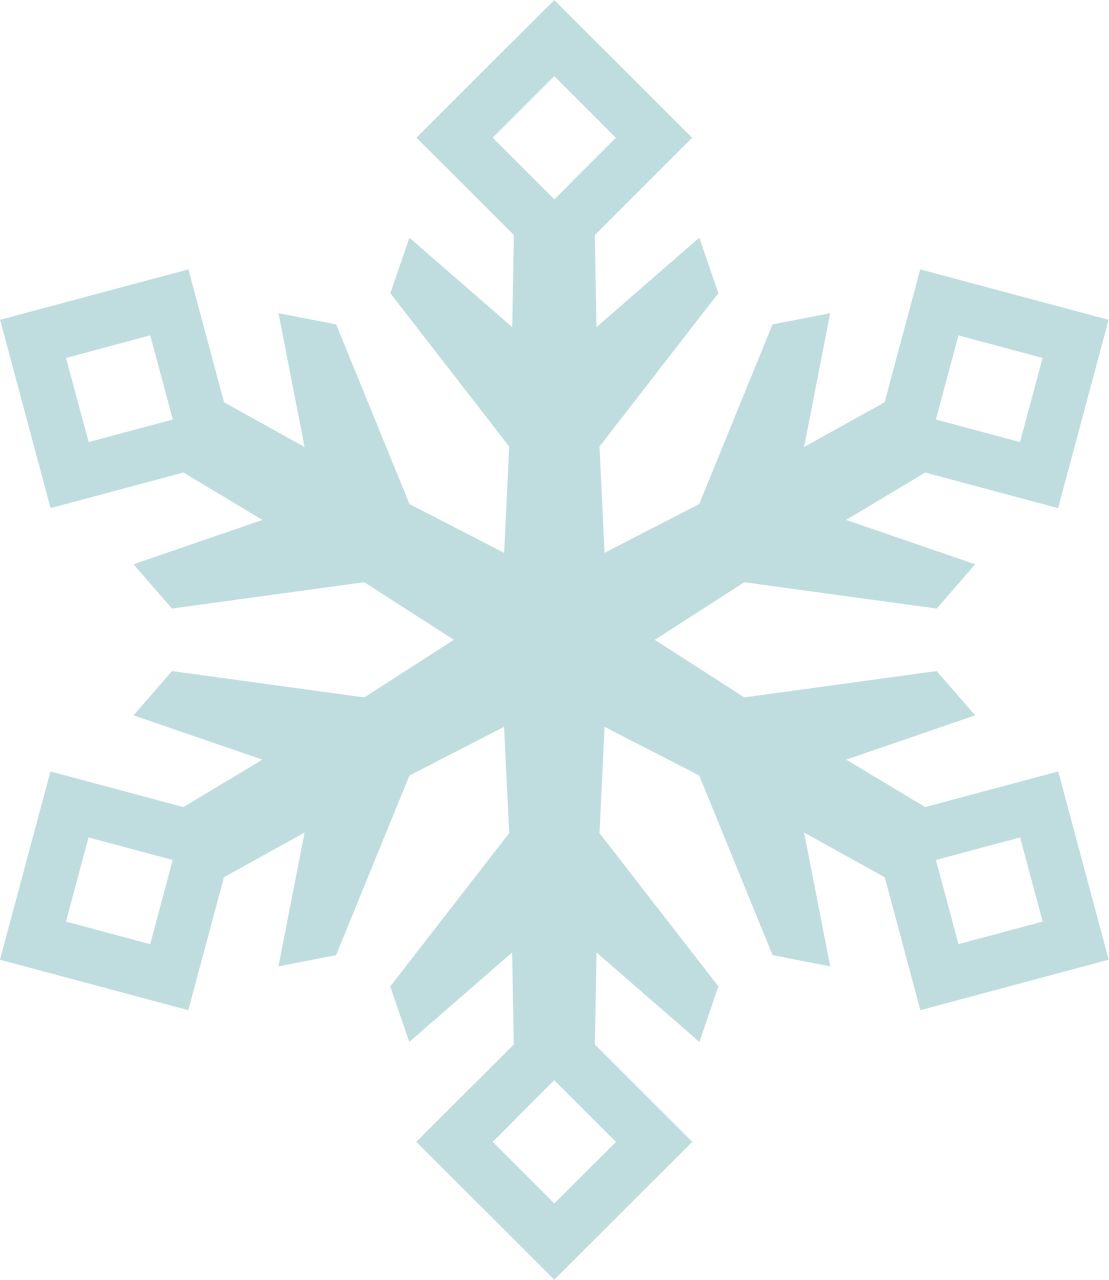 Download Snowflake #13 SVG Cut File - Snap Click Supply Co.